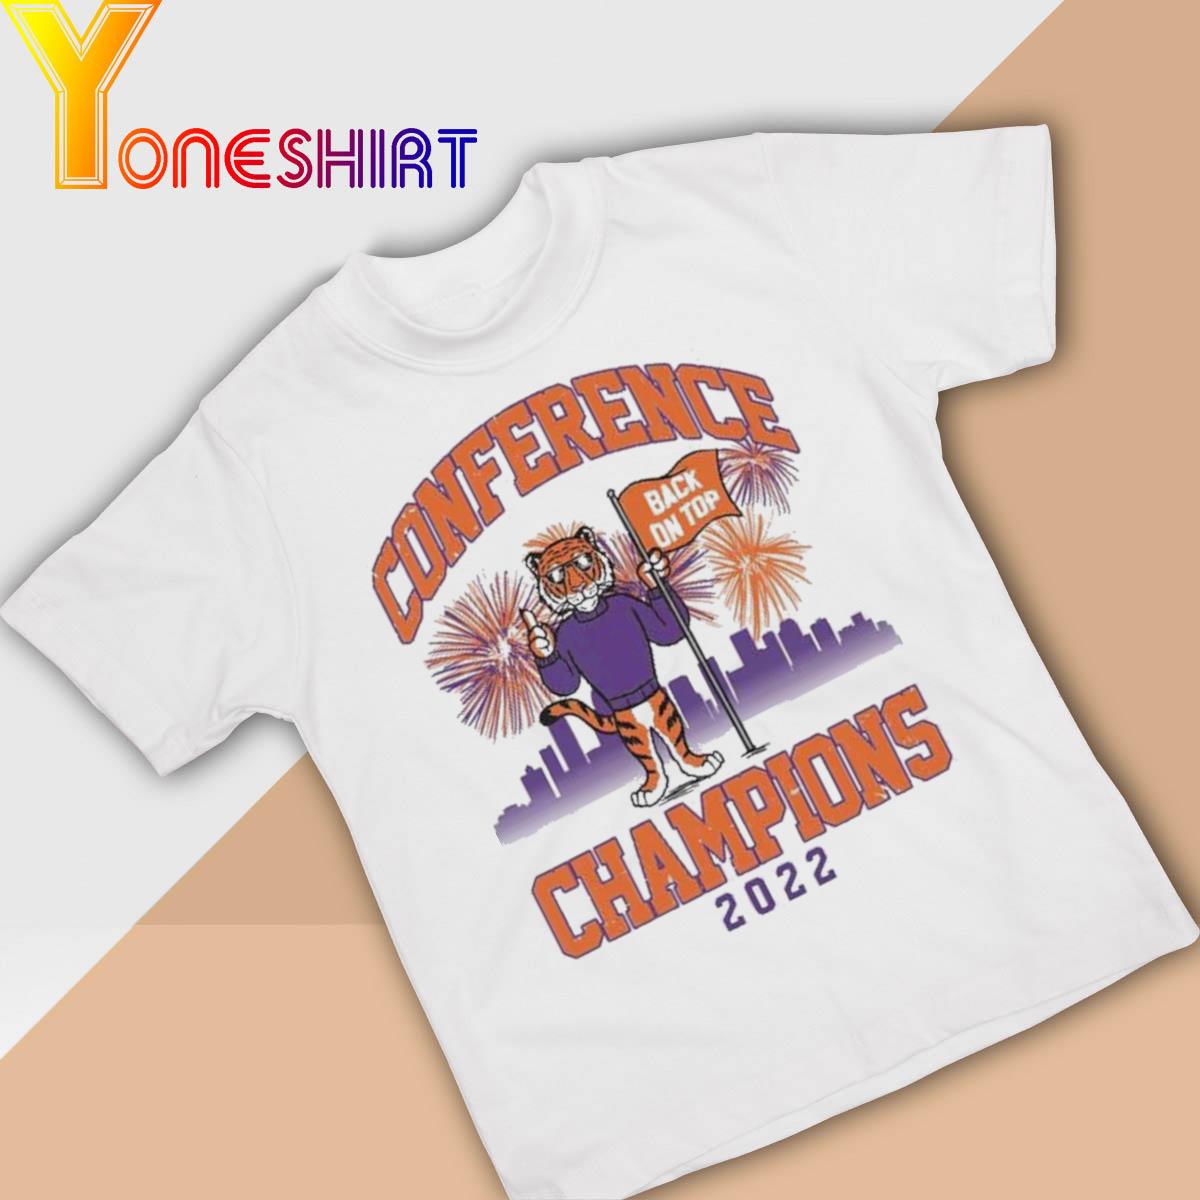 Clemson Tigers Conference Back on top Champions 2022 shirt